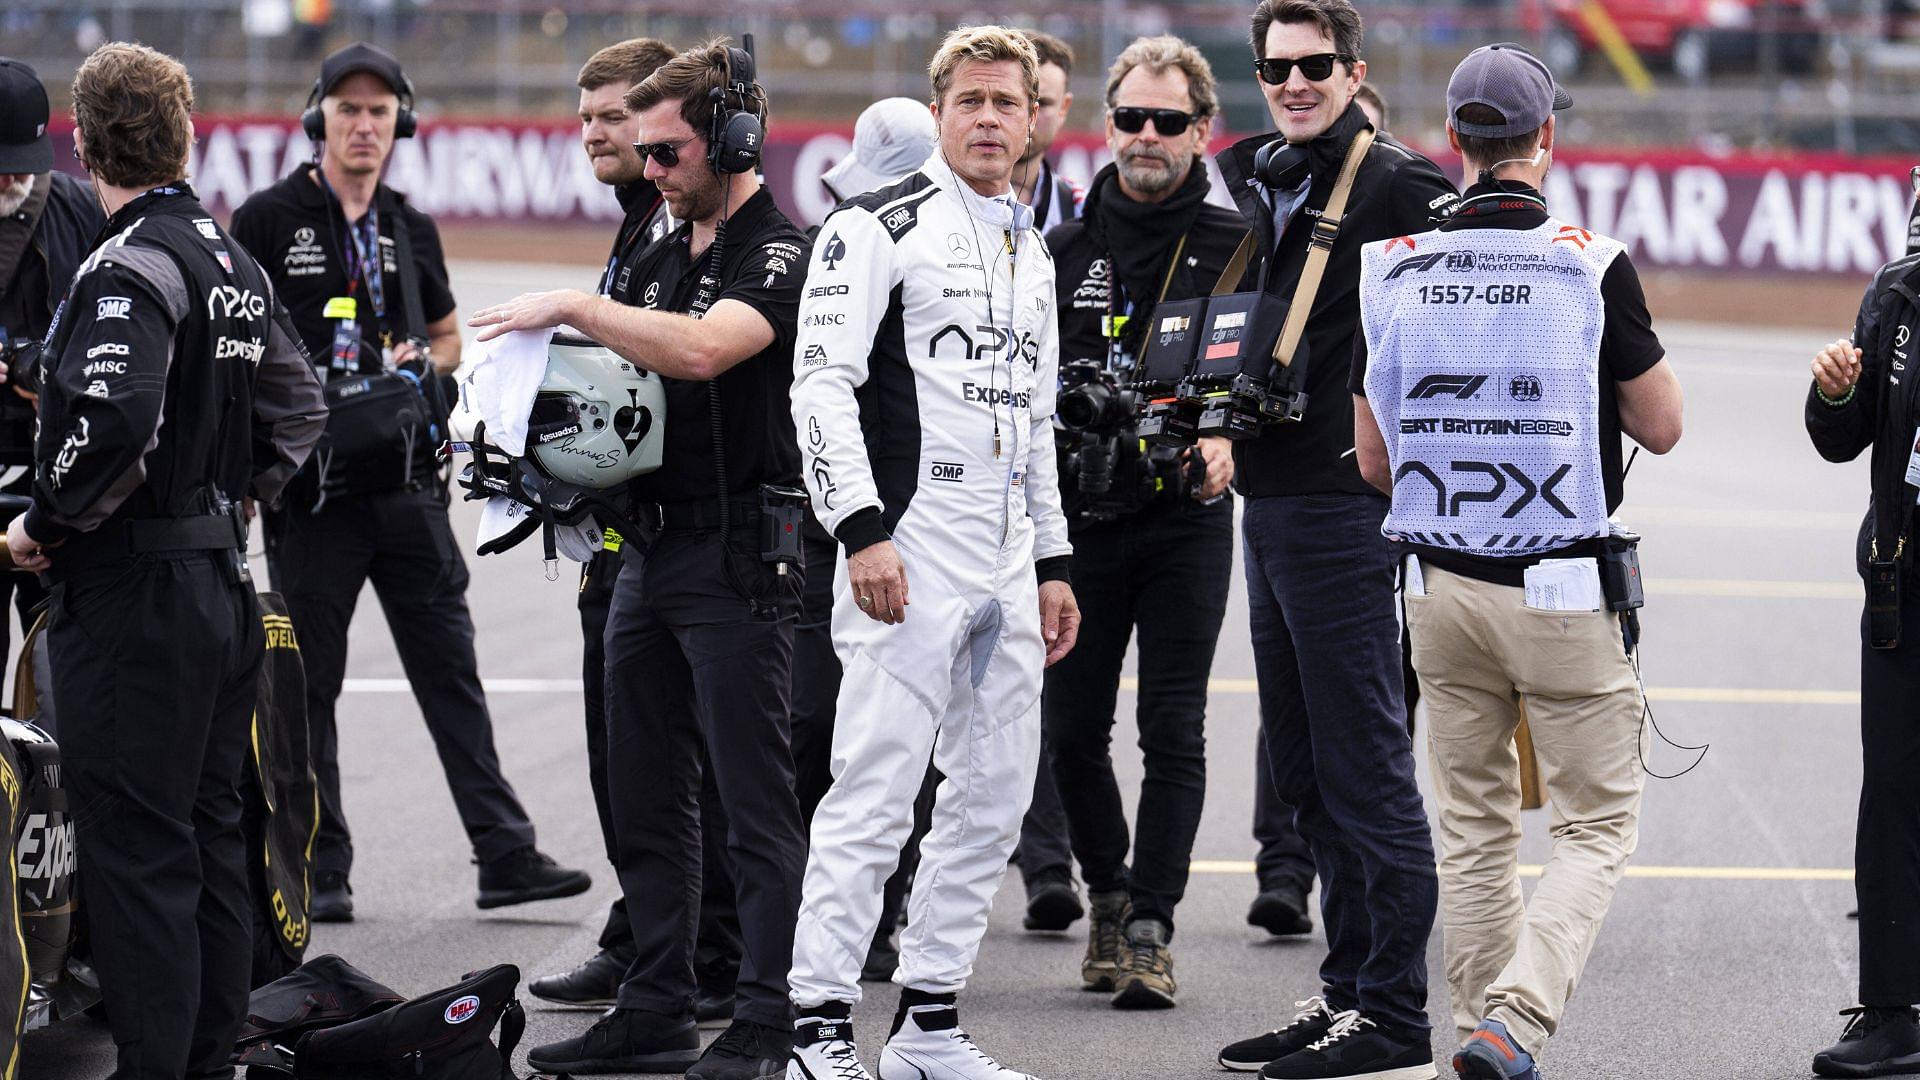 “I Was a NASCAR Fan”: Producer of Brad Pitt’s ‘F1’ Swaps Allegiance After a 3 Year Grind